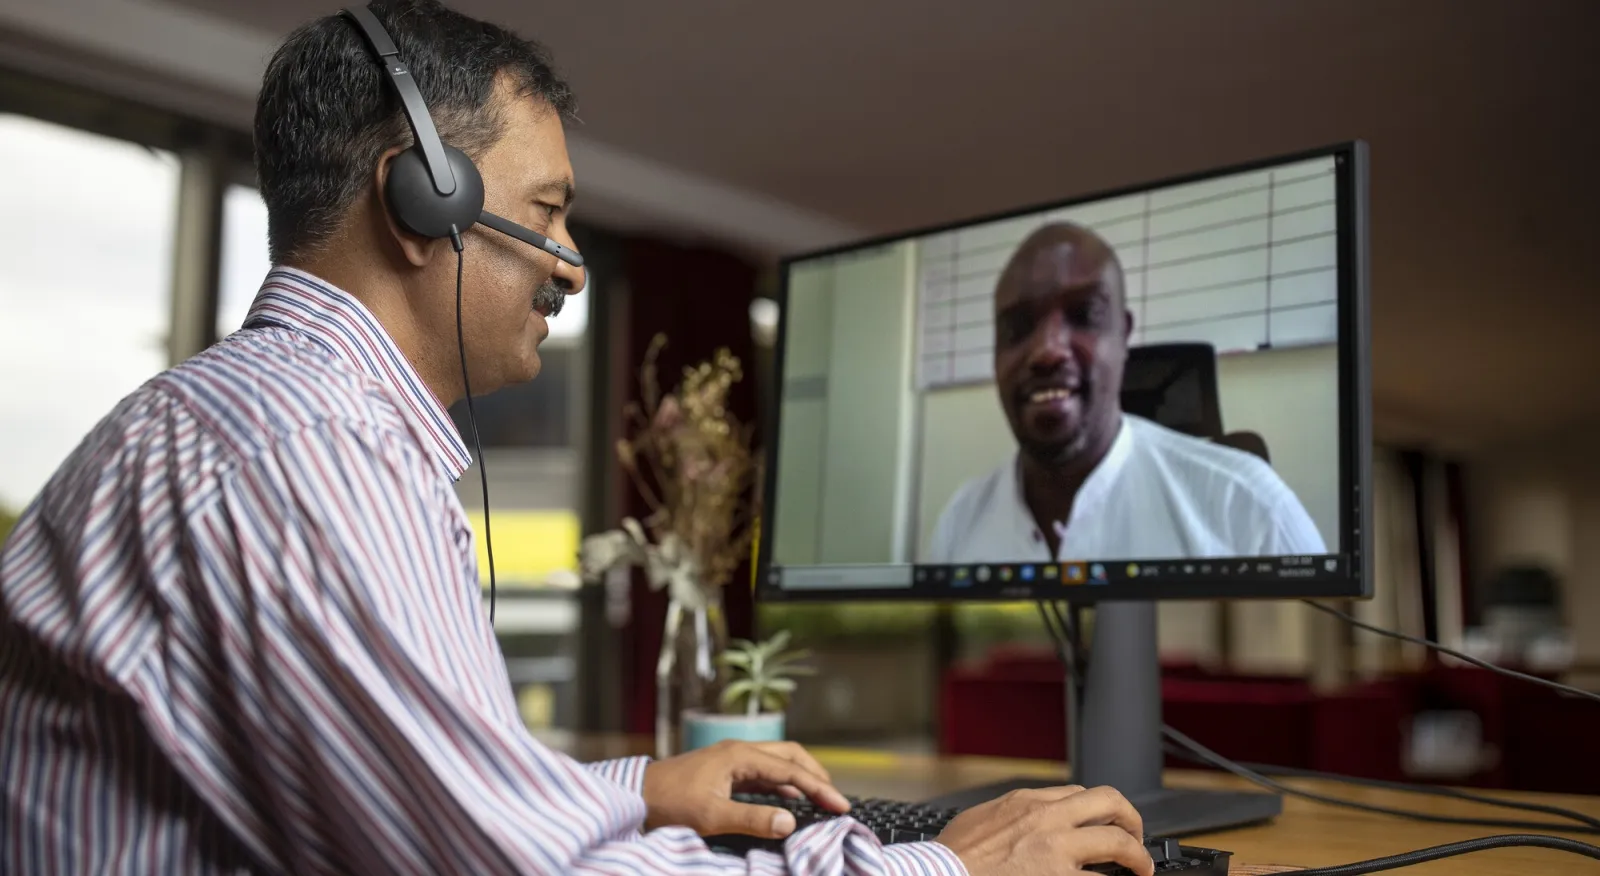 Two men are on a Zoom call together. One man is in the room, with his side to the camera. On his screen is another smiling man.